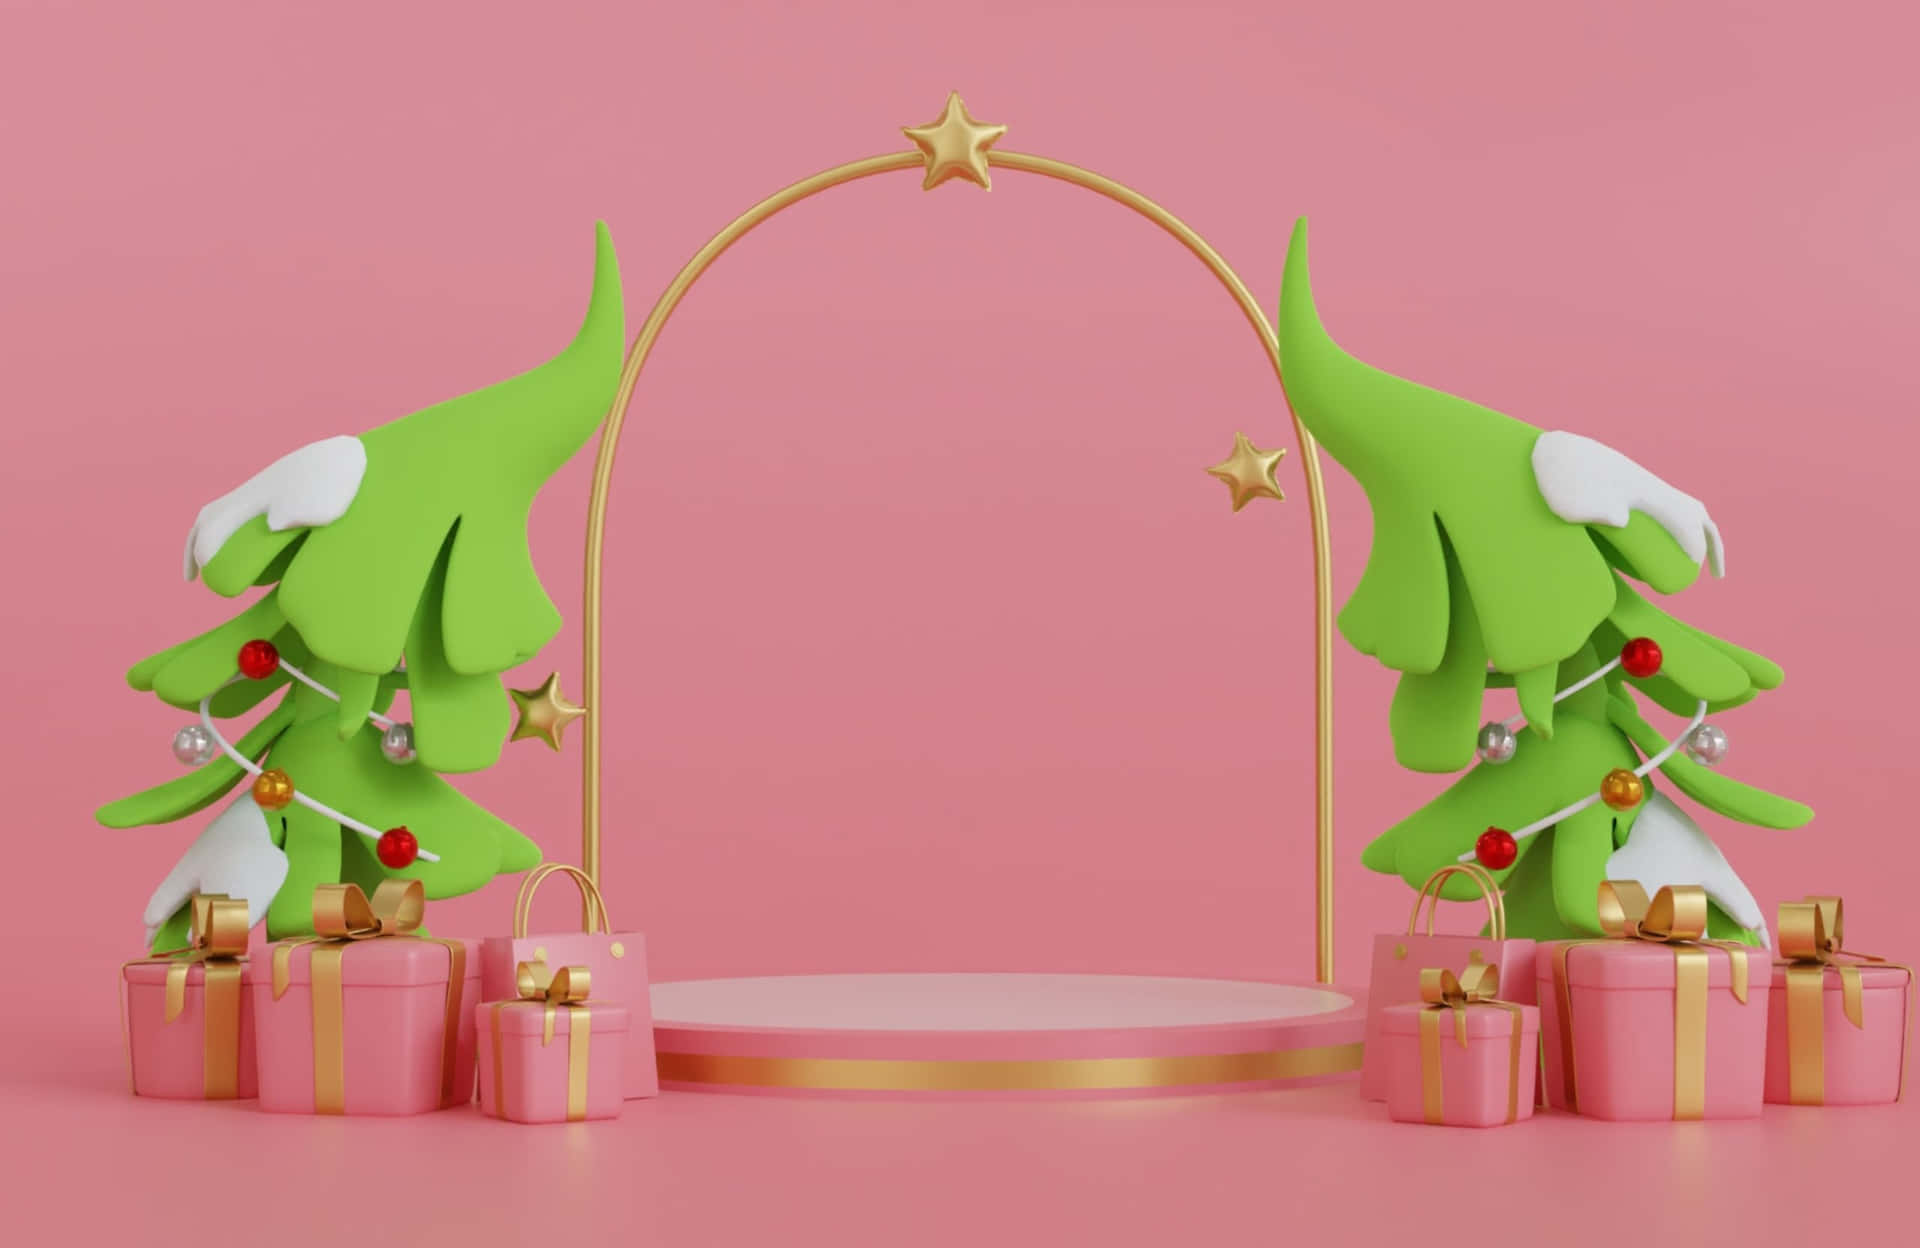 A Christmas Tree And Presents On A Pink Background